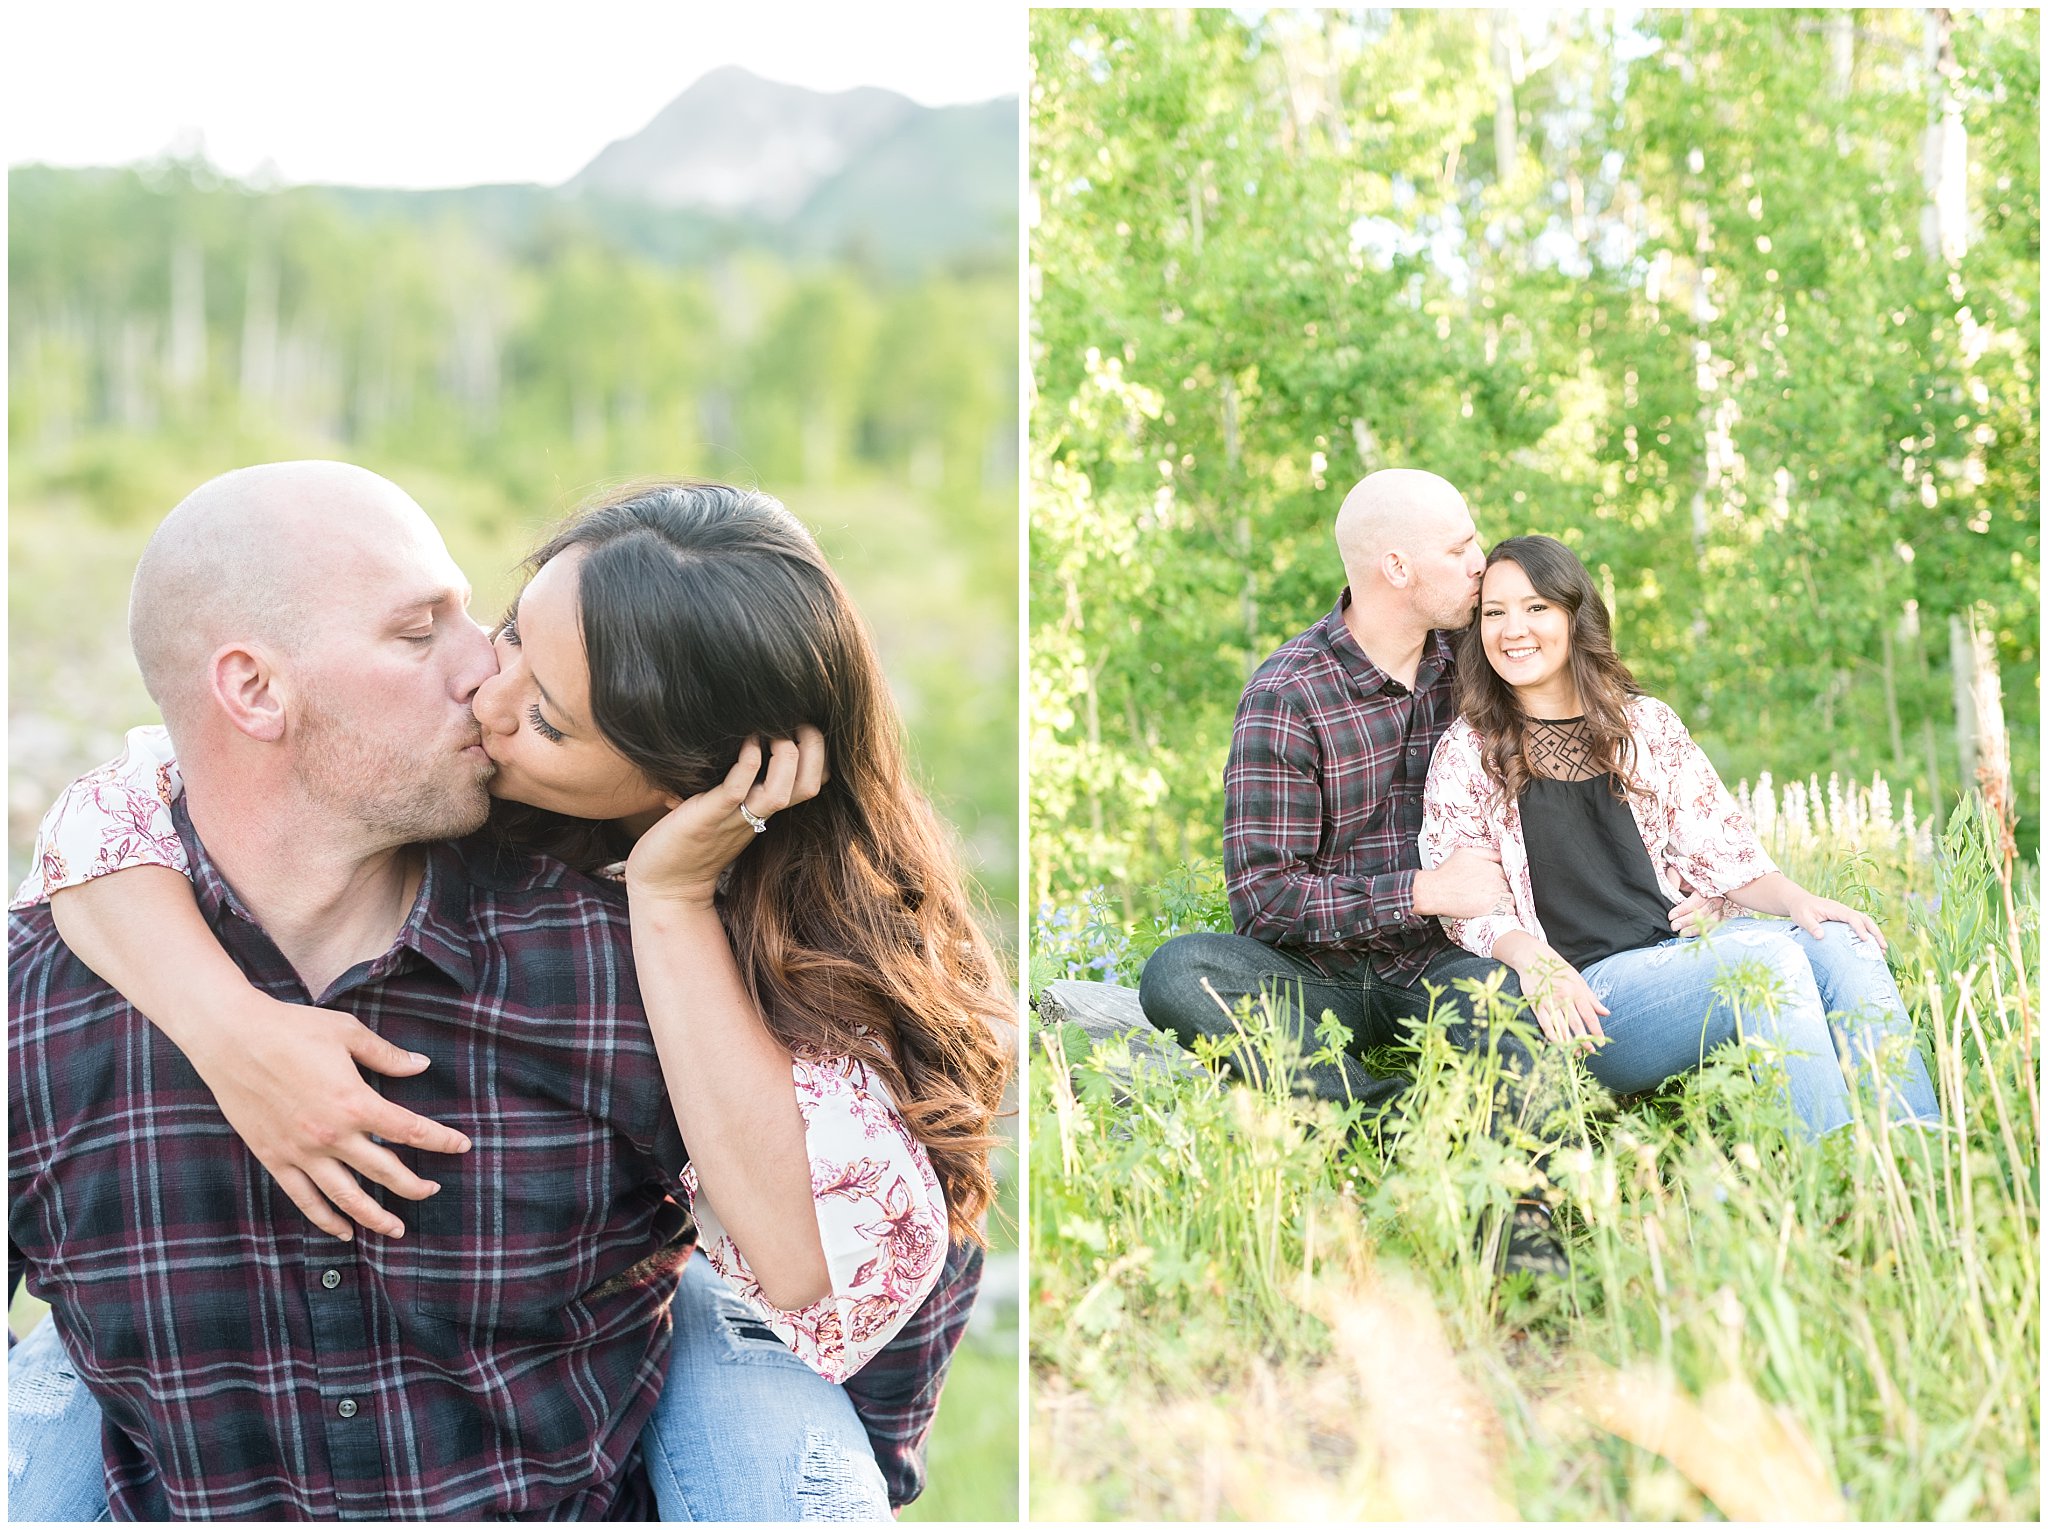 Couple candid moments in the Aspen Trees and wildflowers during engagement session | Snowbasin Utah Engagements